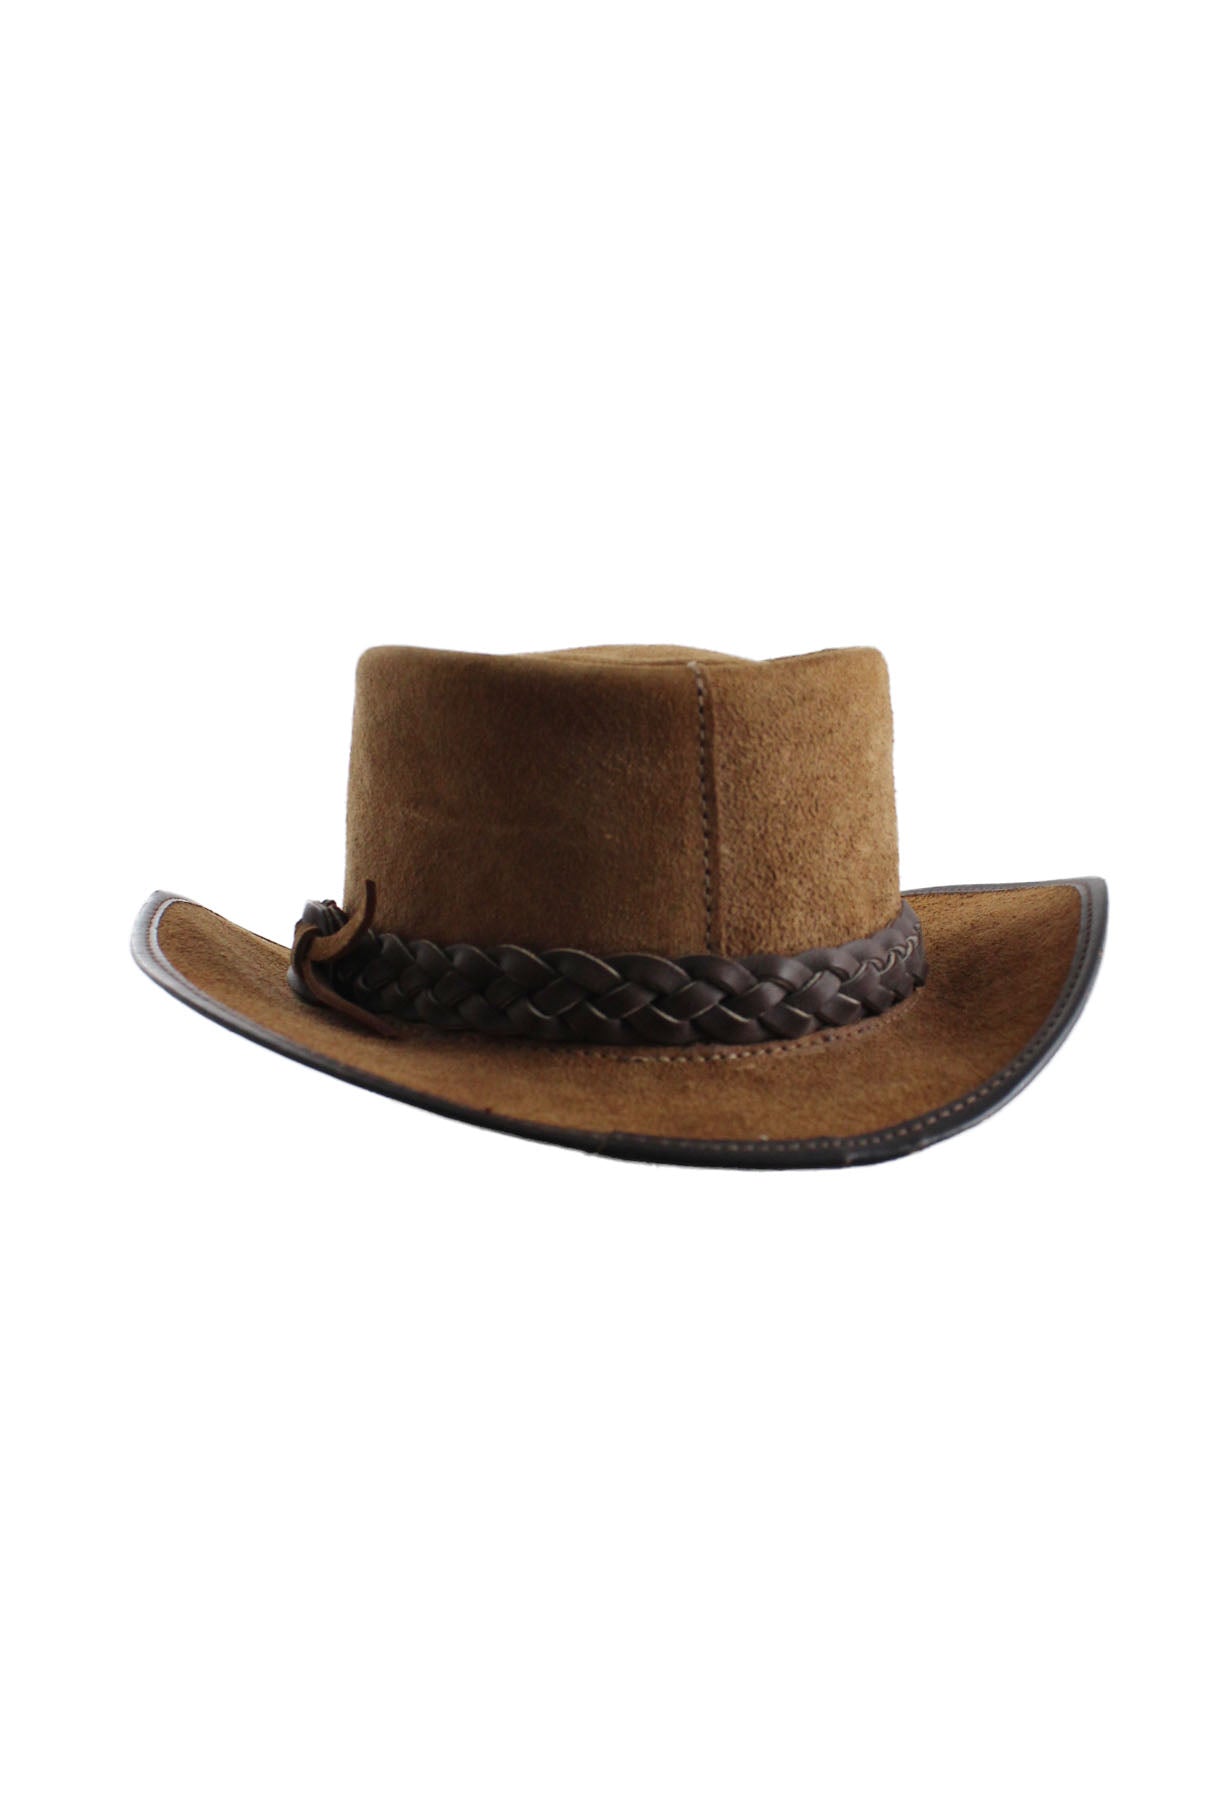 rear view with leather braided hatstrap of hat.